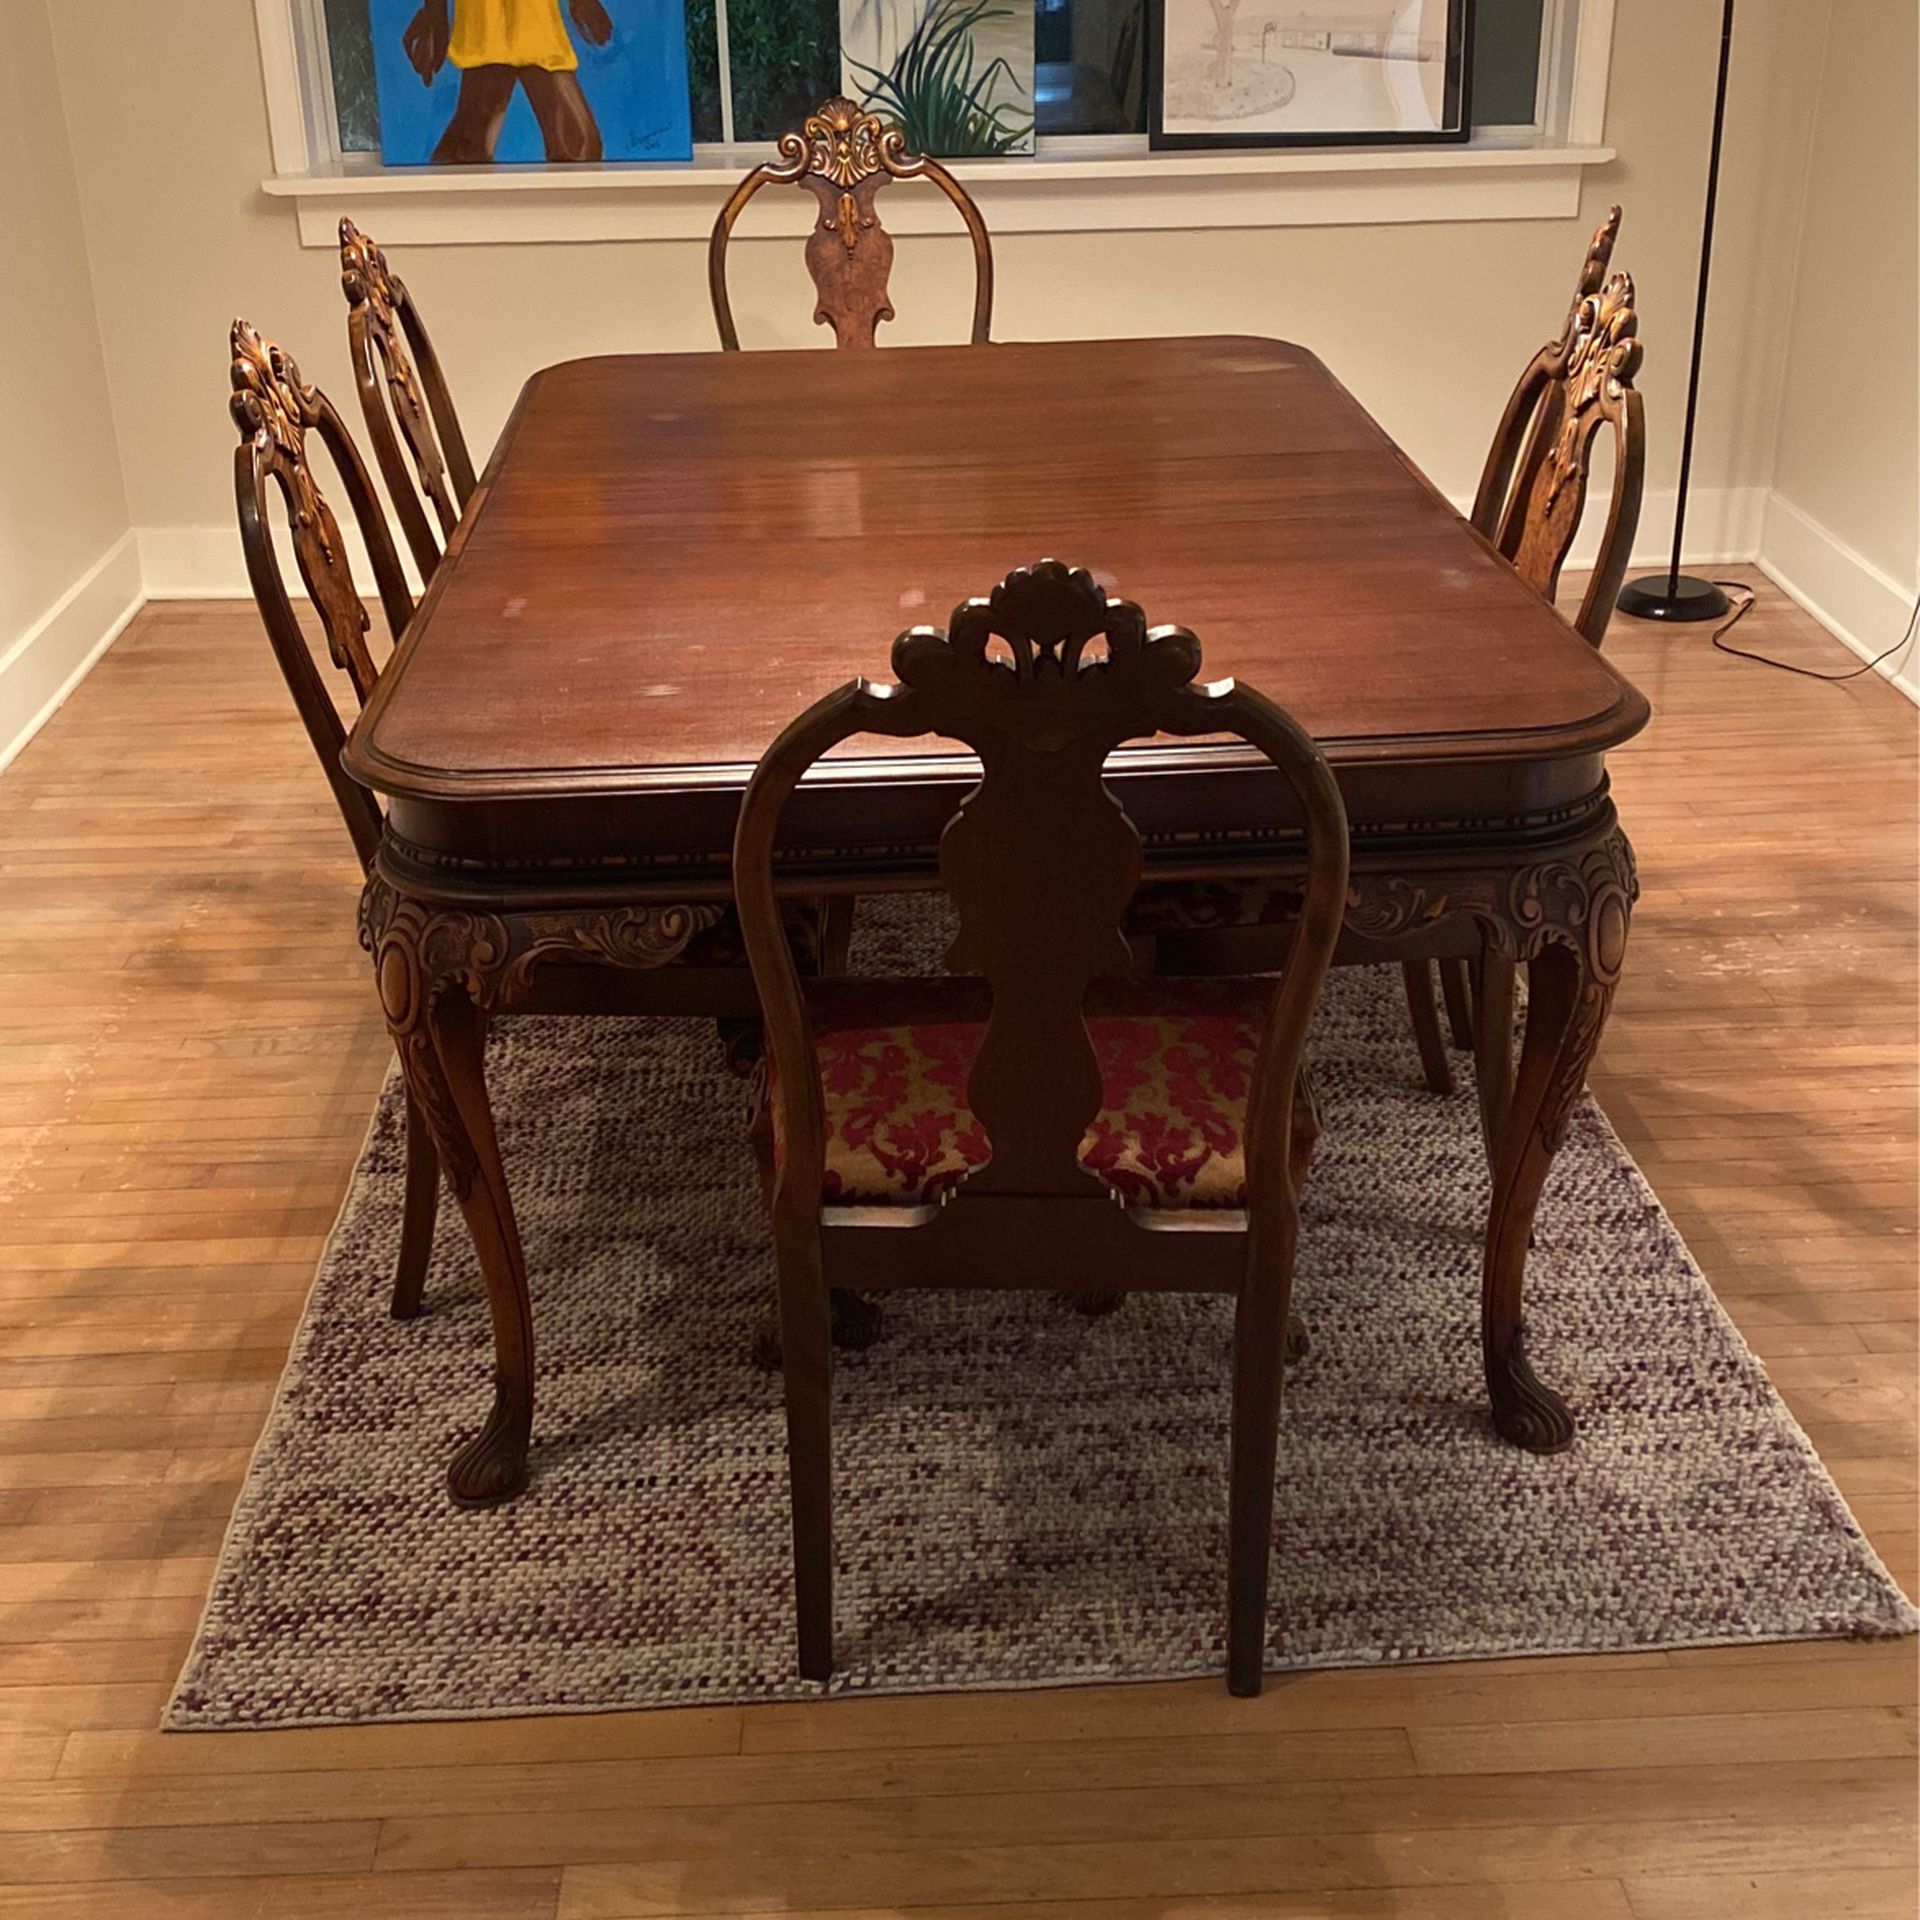 Antique dining room table and chairs